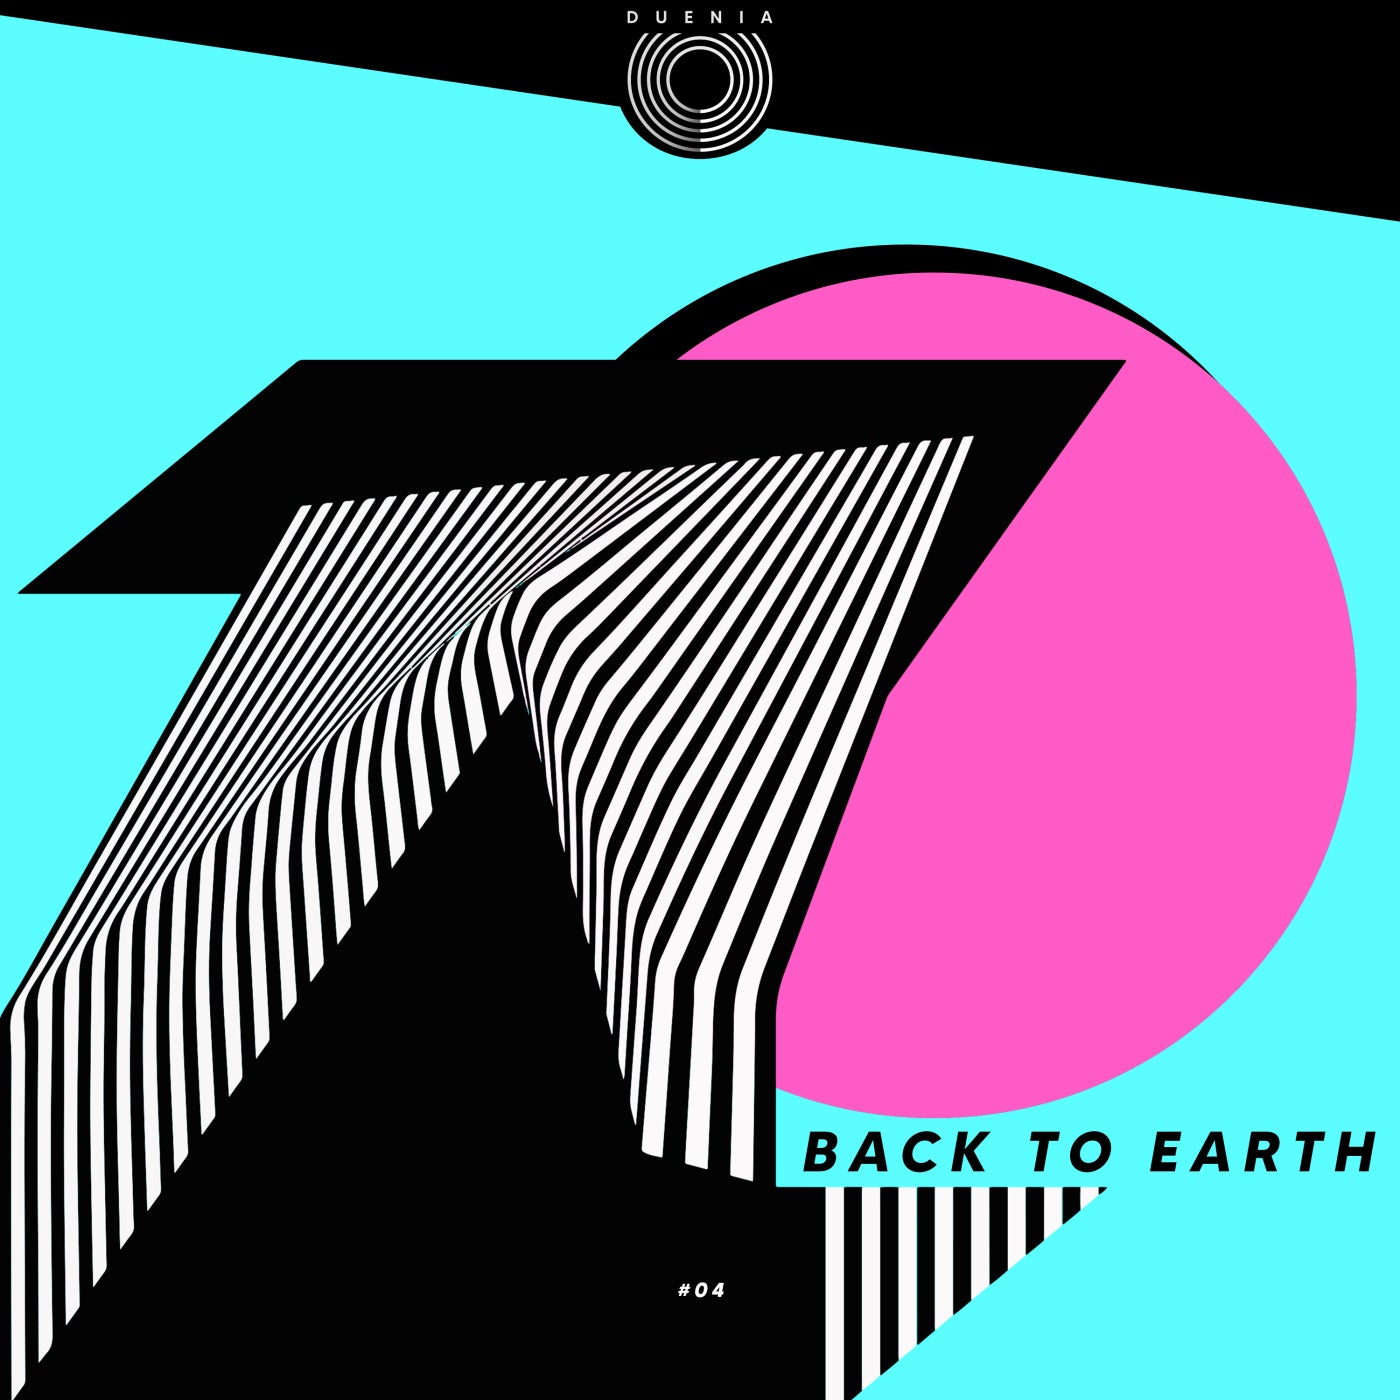 Back to Earth #04